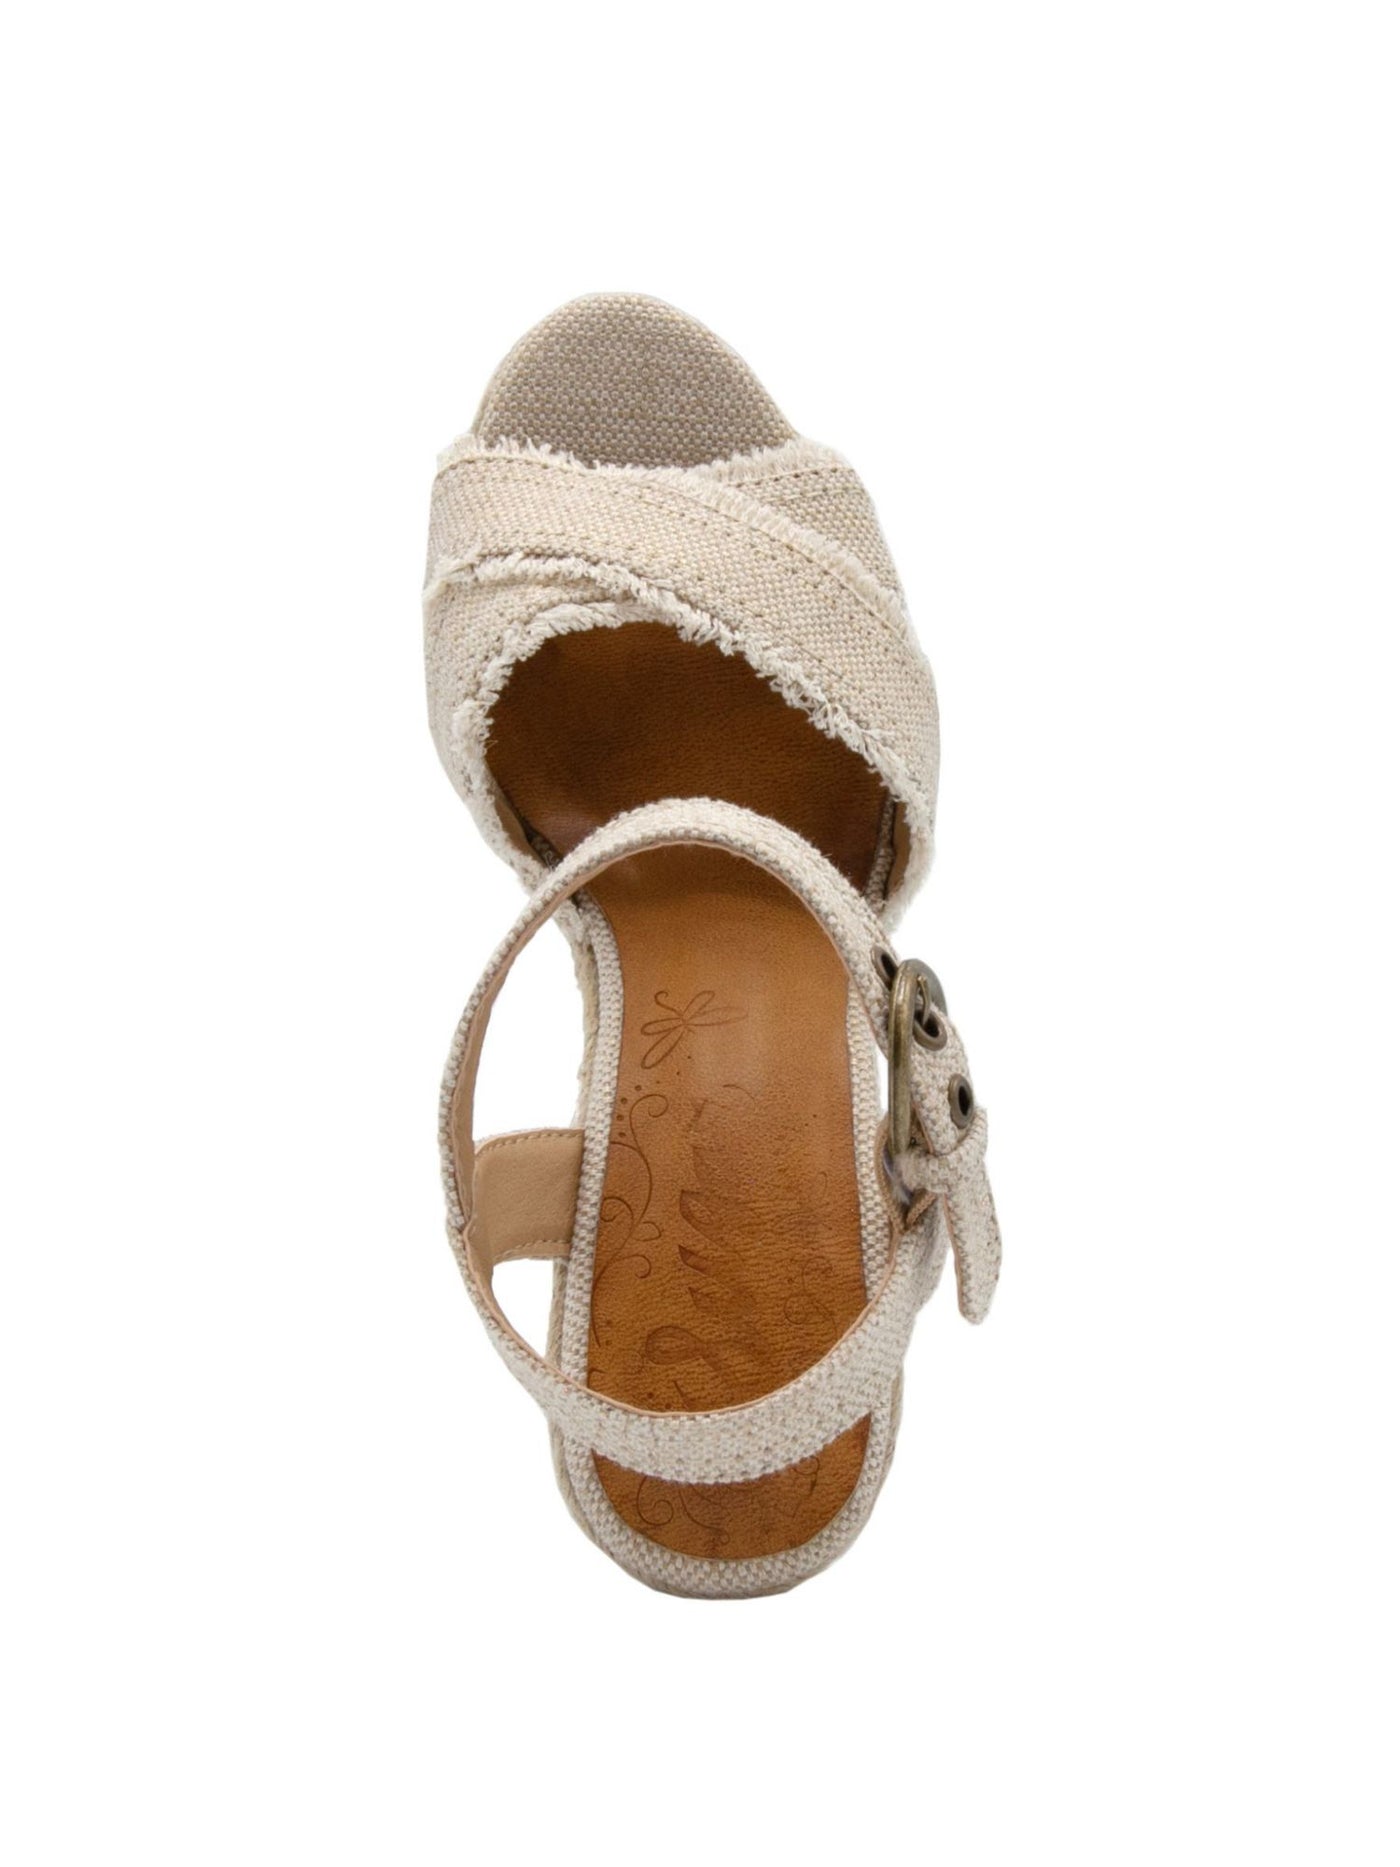 SUGAR Womens Beige Frayed Padded Jute Adjustable Strap Woven Fave Round Toe Wedge Buckle Espadrille Shoes 9.5 M